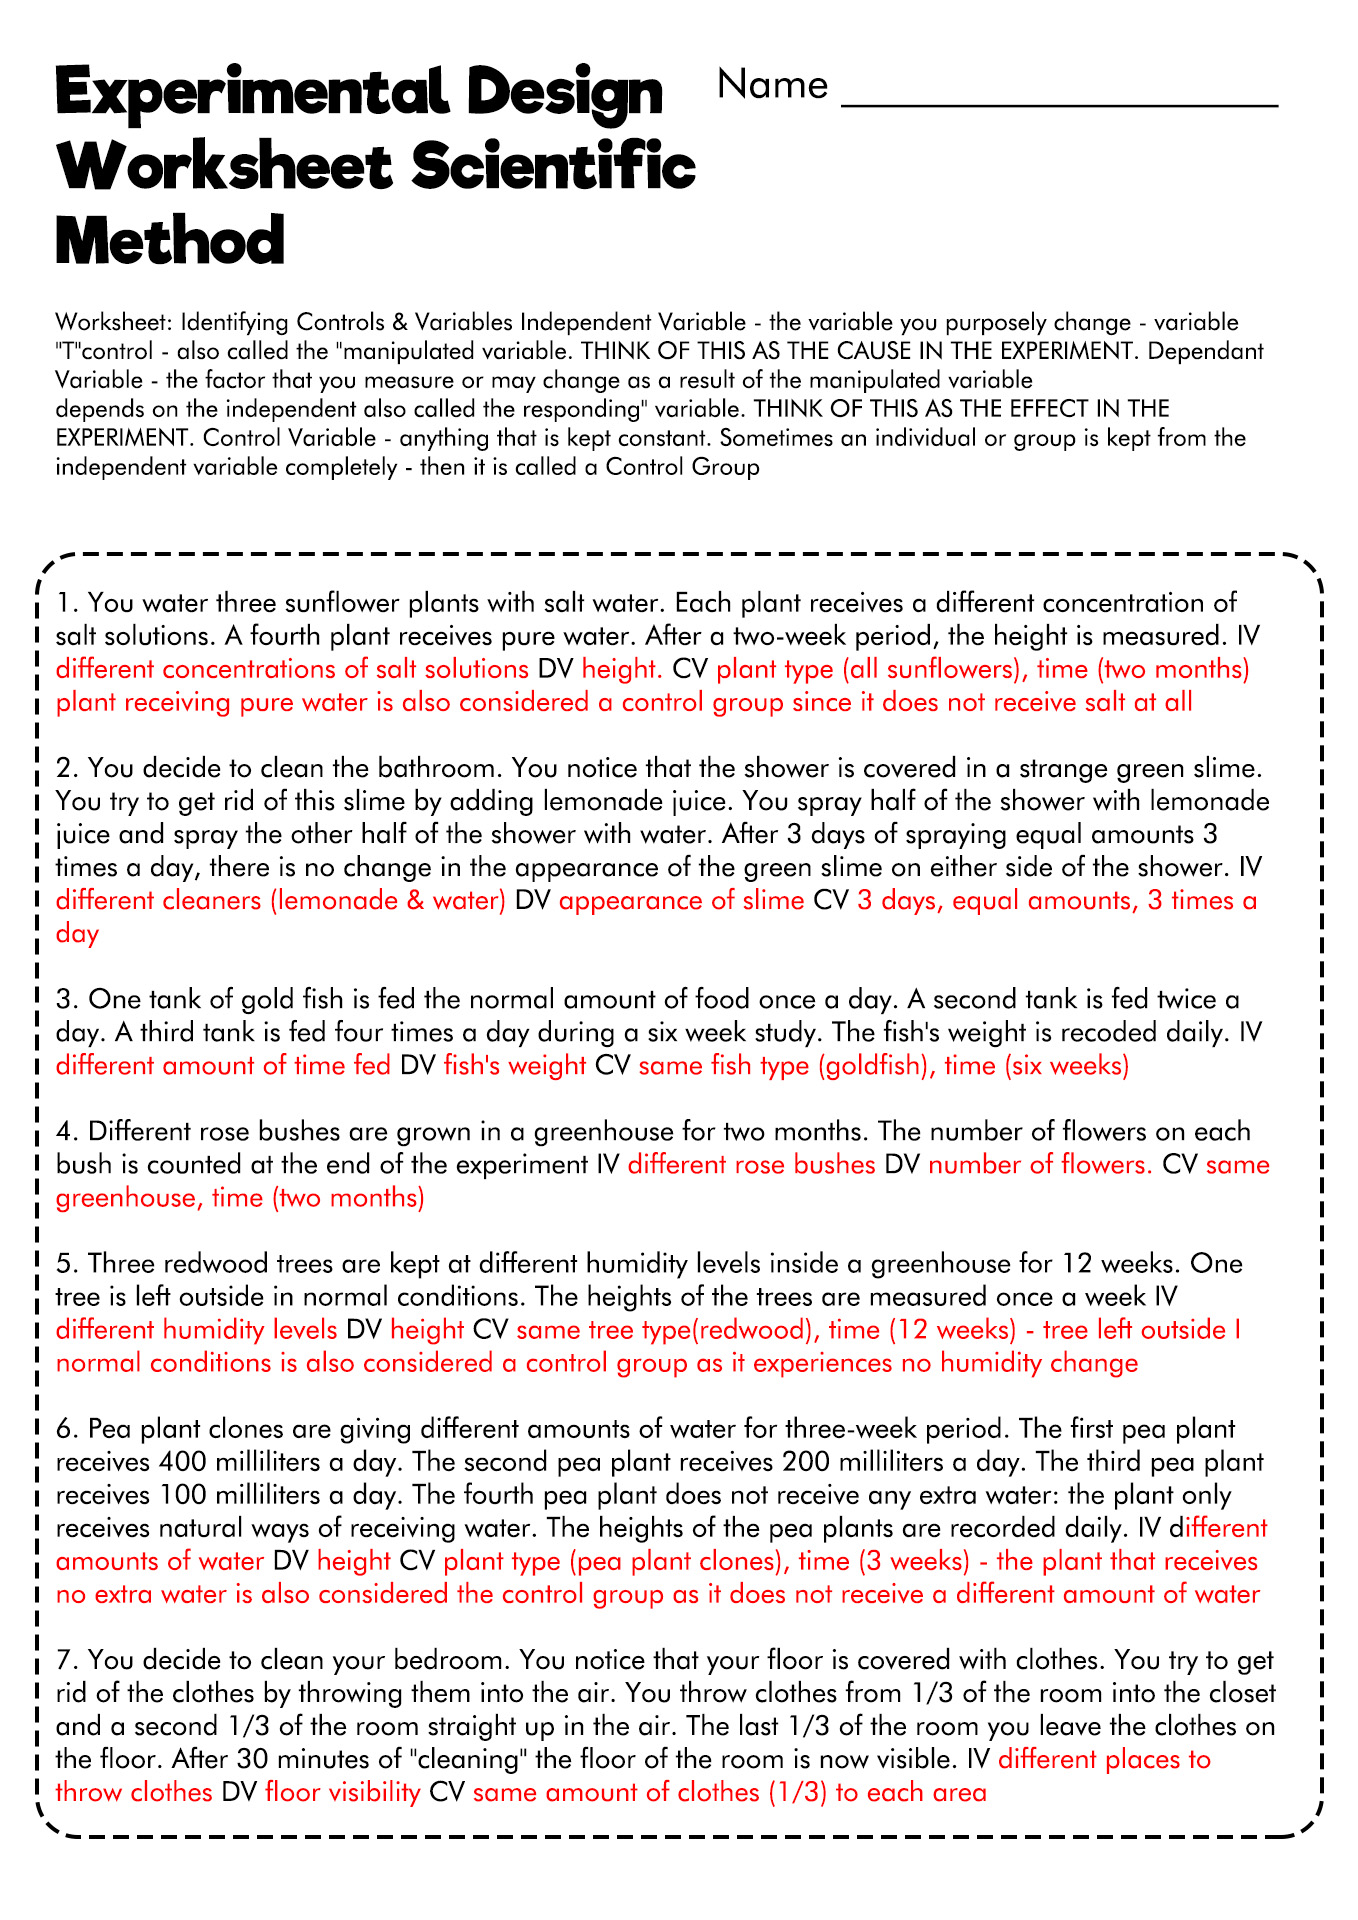 evidence-of-evolution-worksheet-answer-key-pdf-waltery-learning-solution-for-student